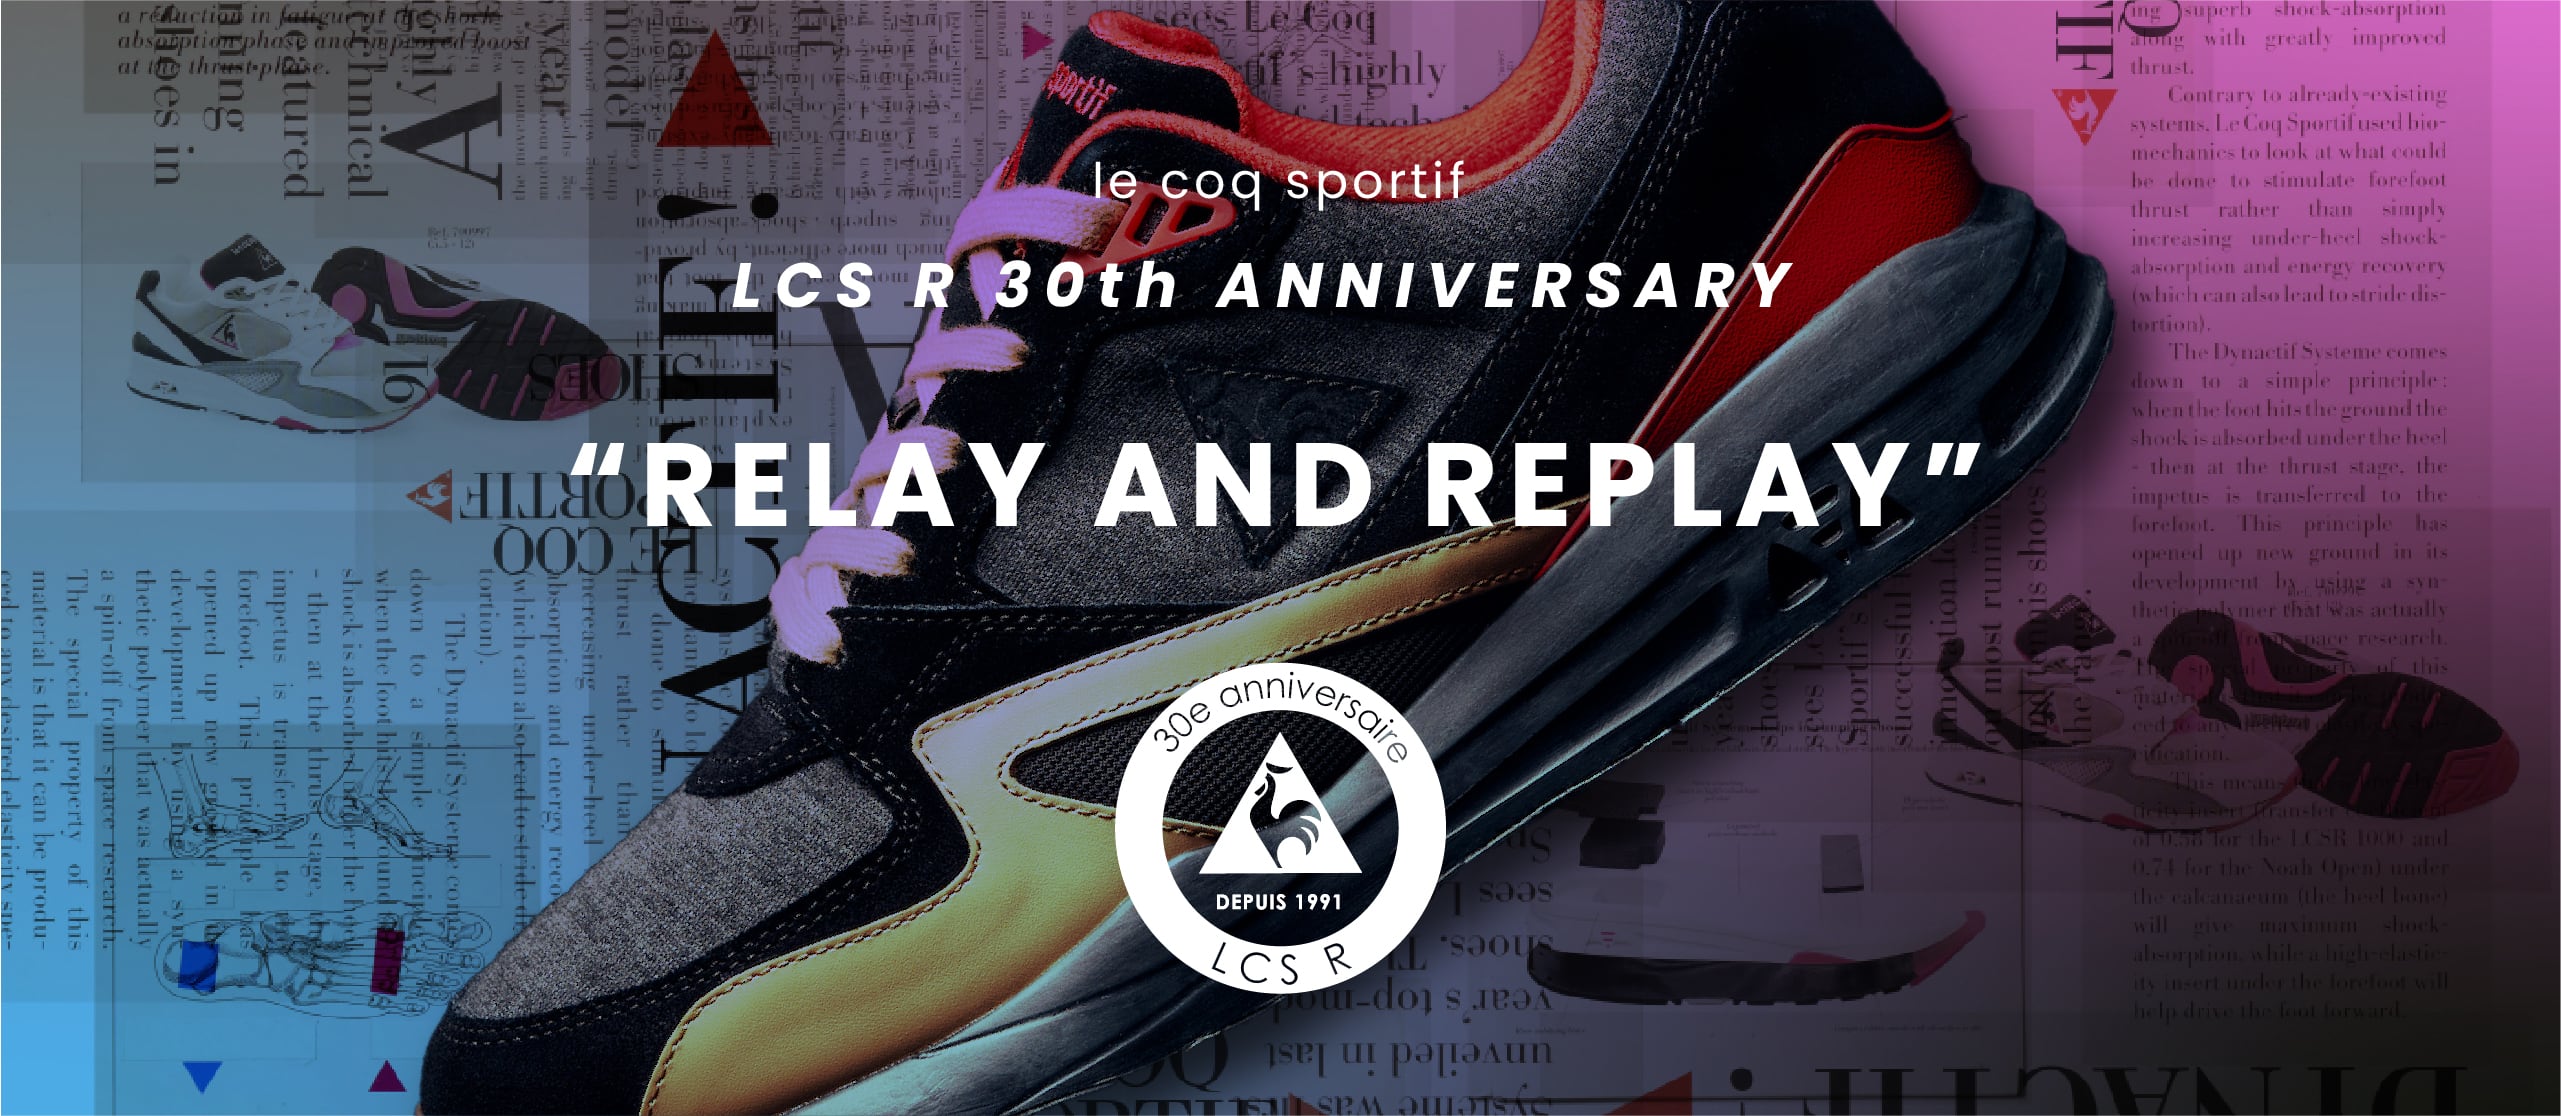 "le coq sportif LCS R 30th ANNIVERSARY “RELAY AND REPLAY”"